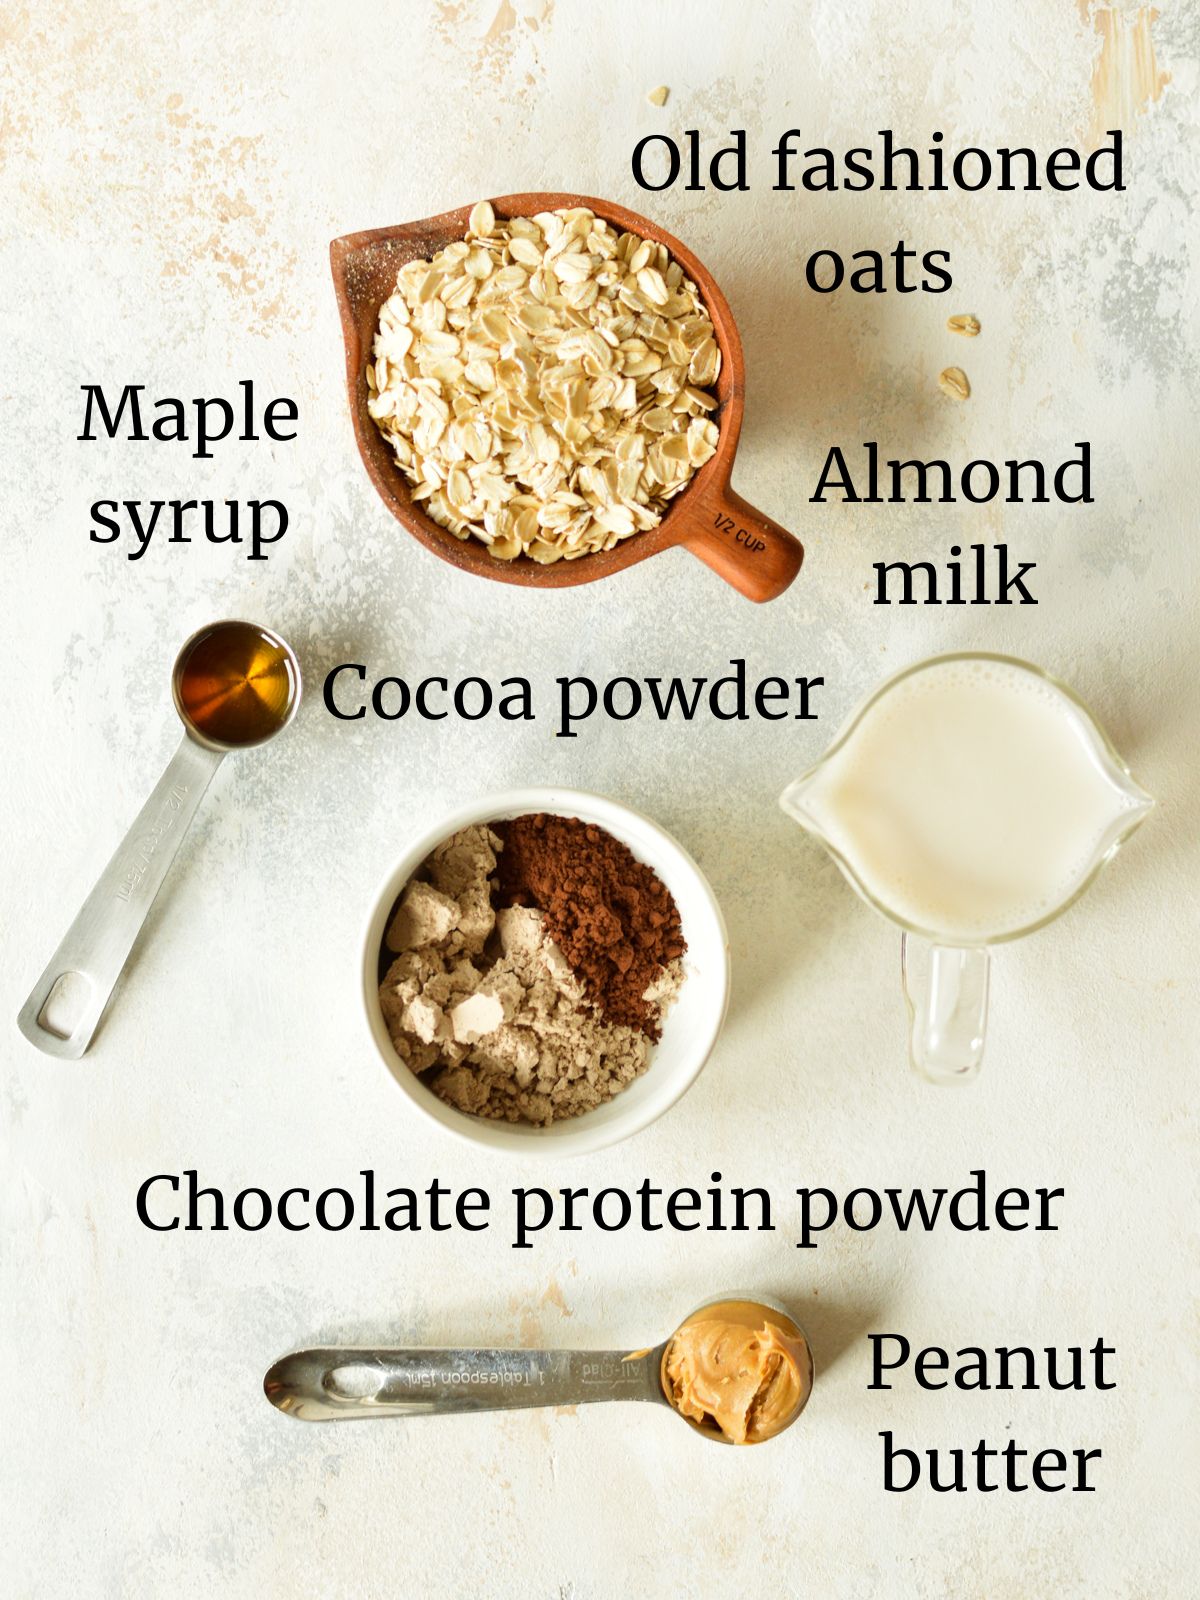 oats, almond milk, peanut butter, protein powder, cocoa powder, and maple syrup